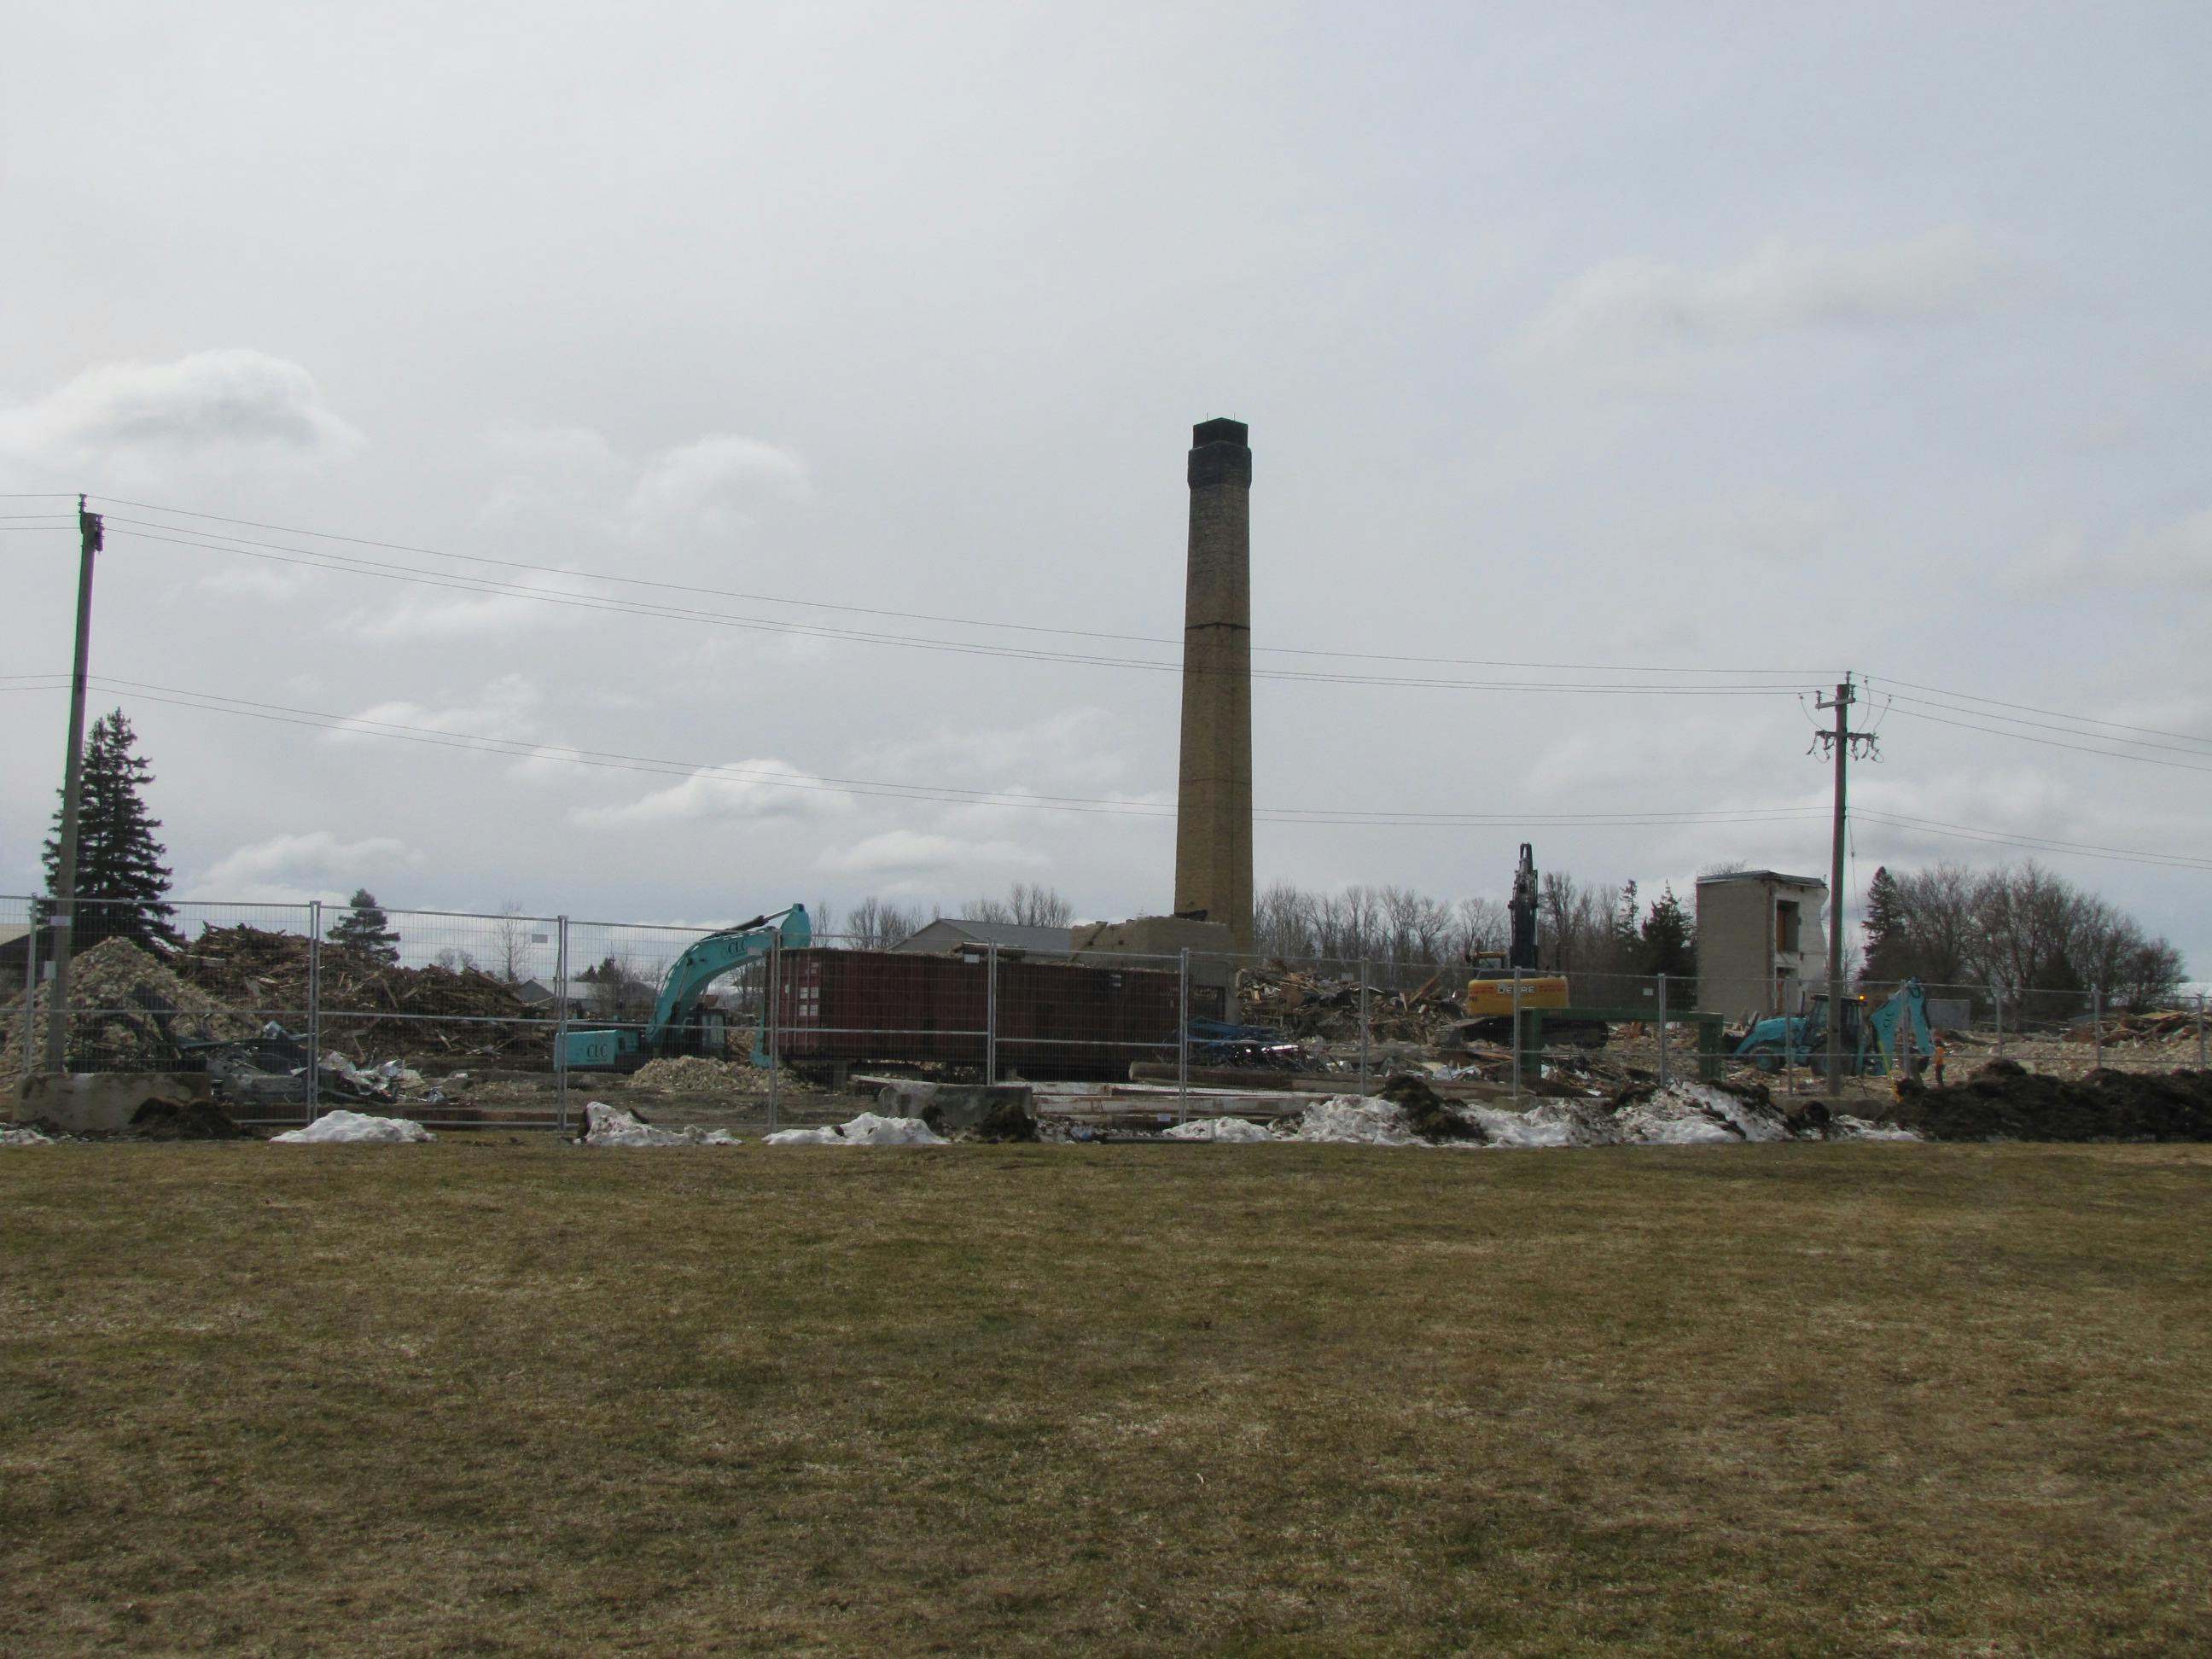 Demolition of Bogdon and Gross - March 18, 2021